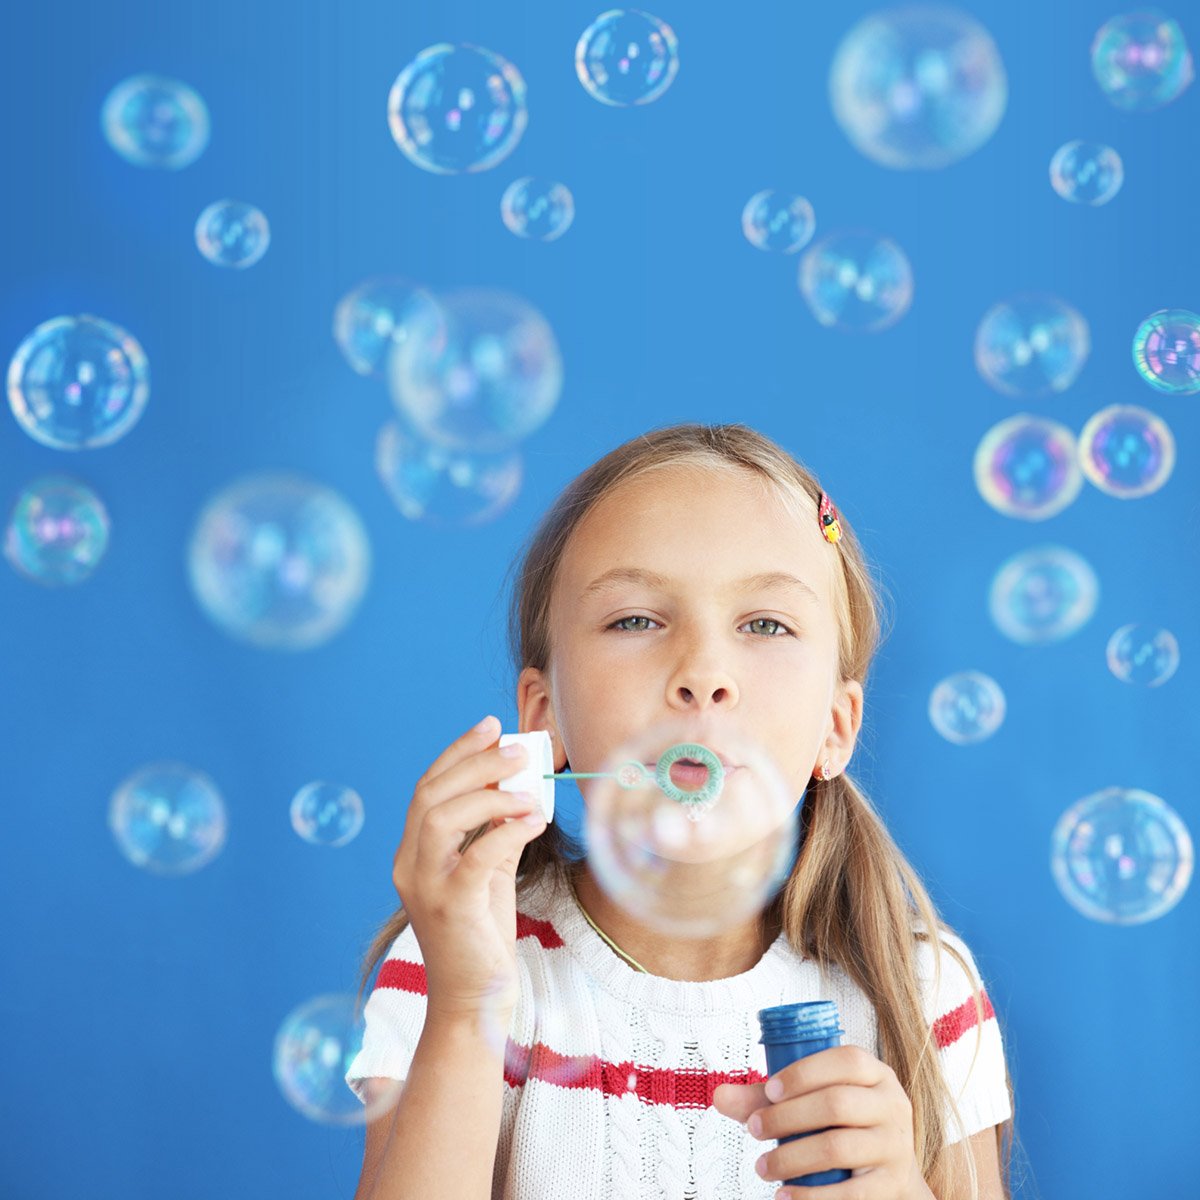 Portrait of blonde haired little girl blowing bubbles on a blue background